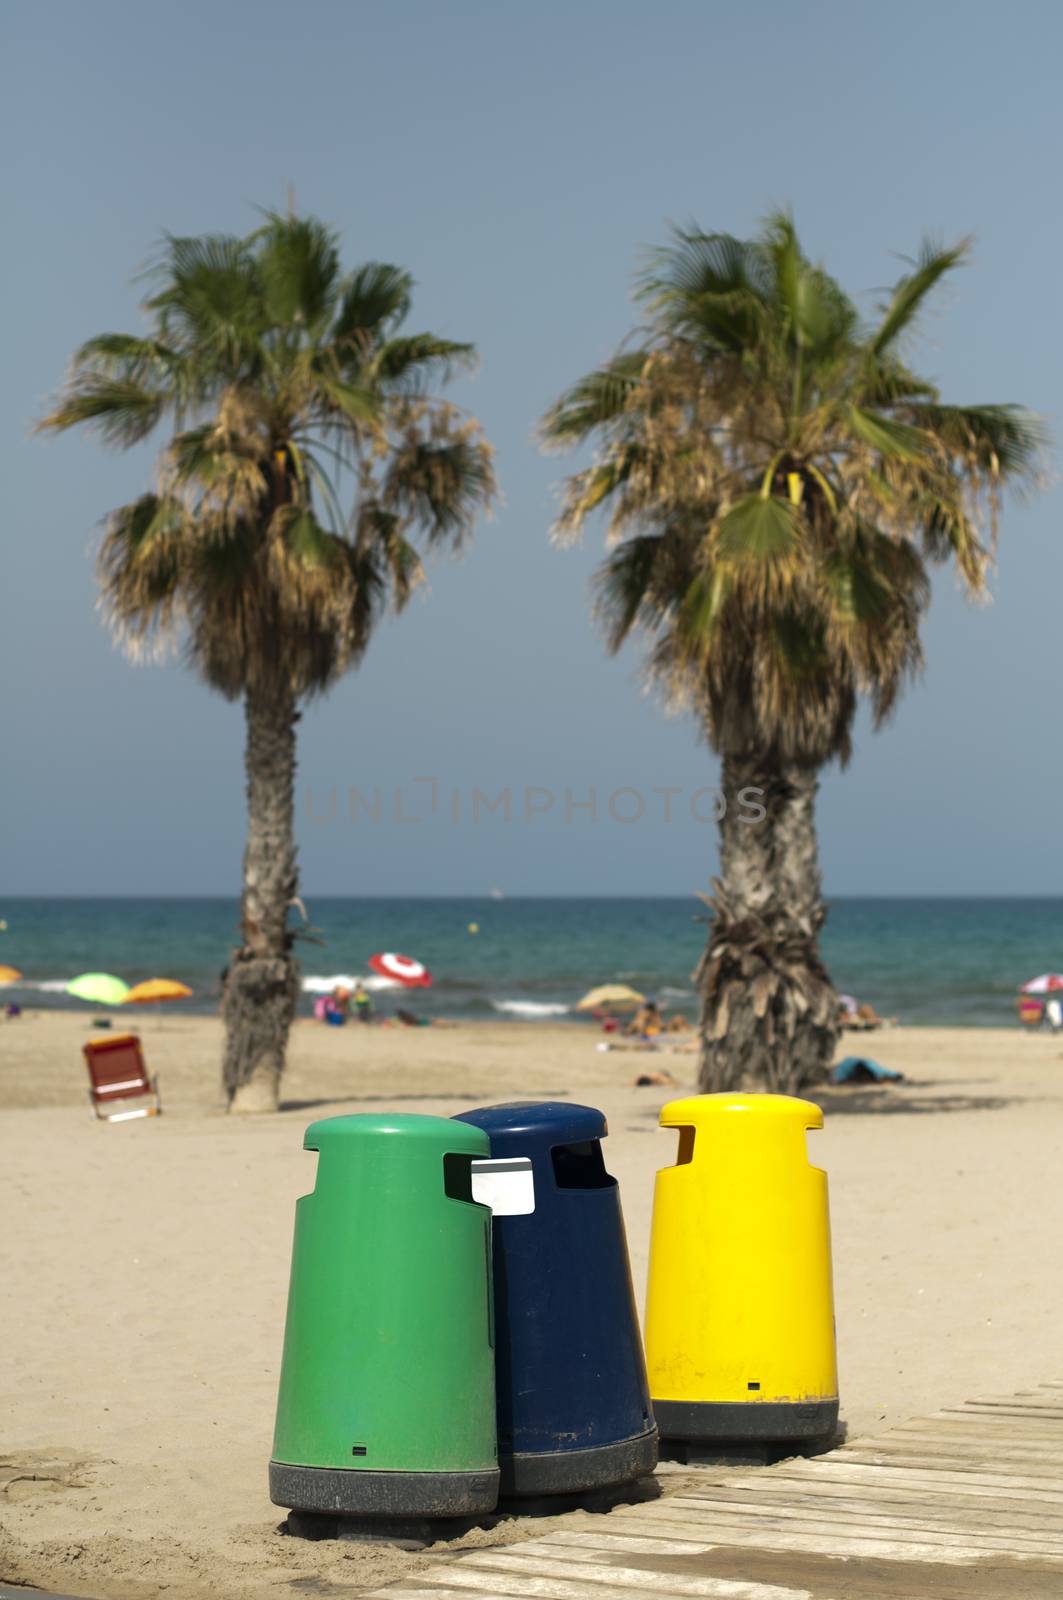 Separate collection of waste on the beach